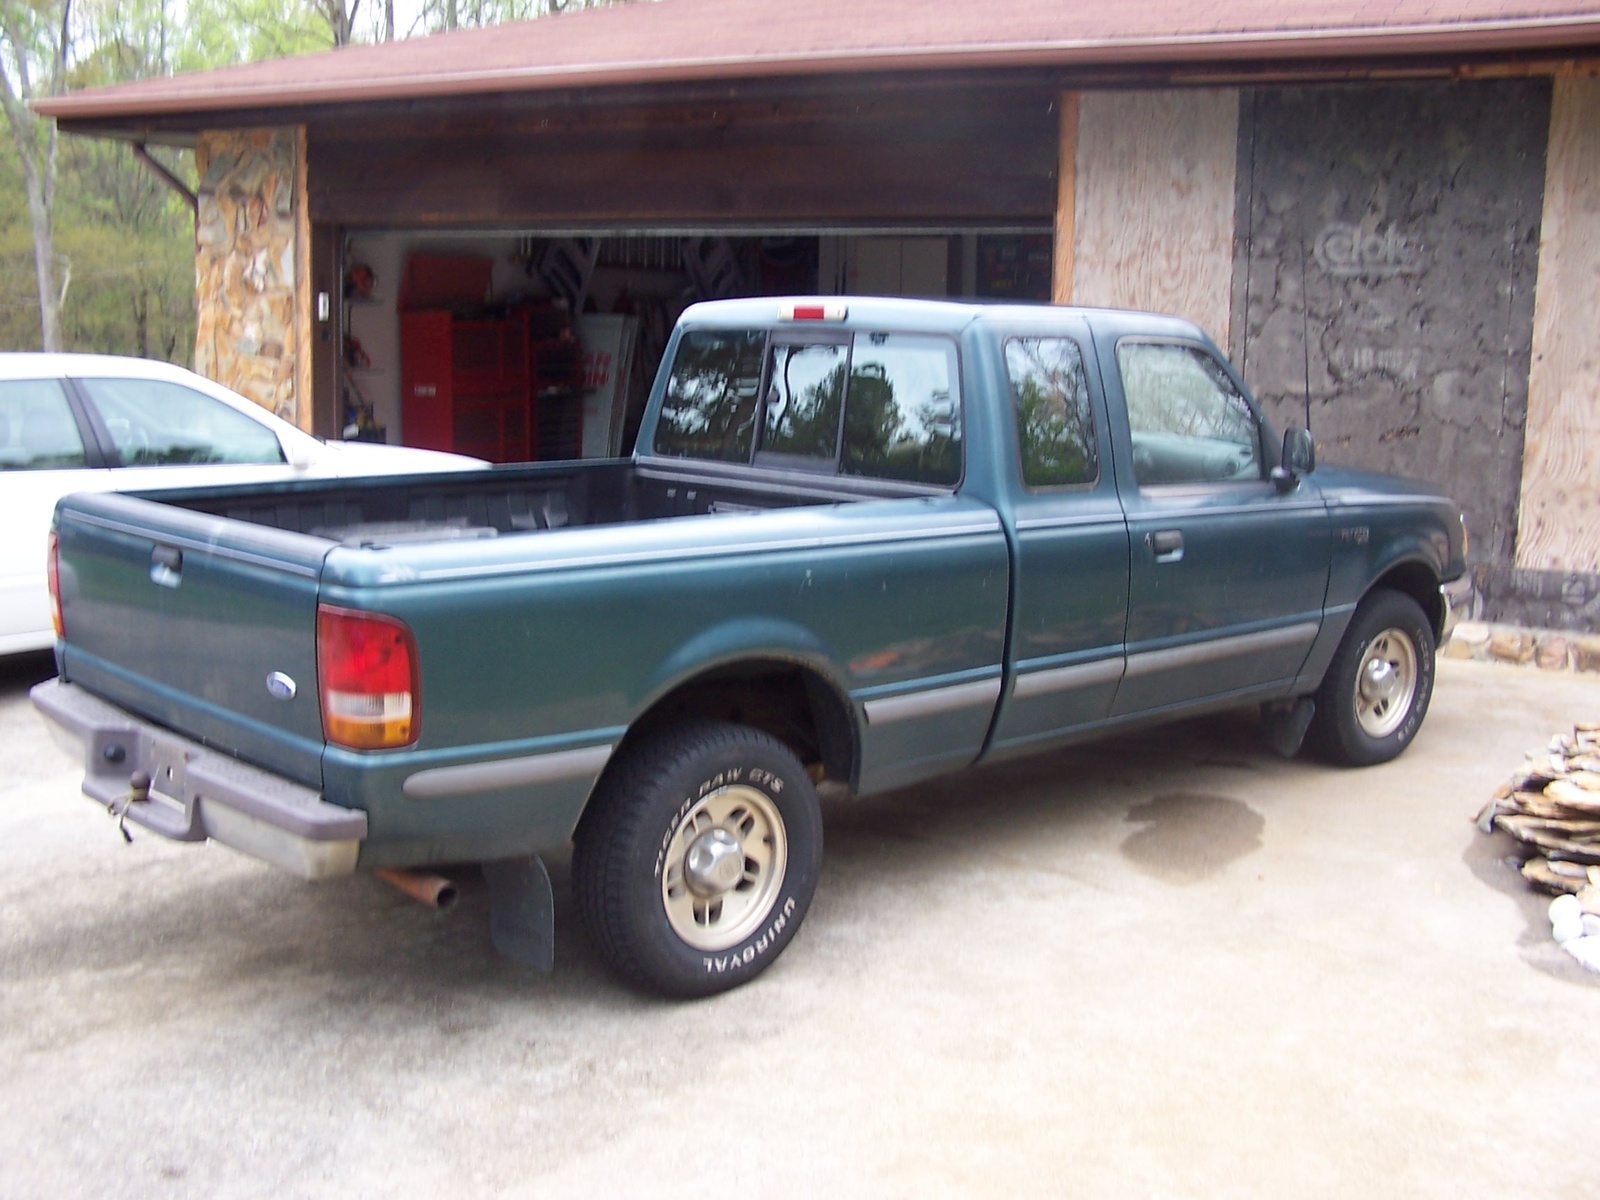 1996 Ford ranger extended cab specifications